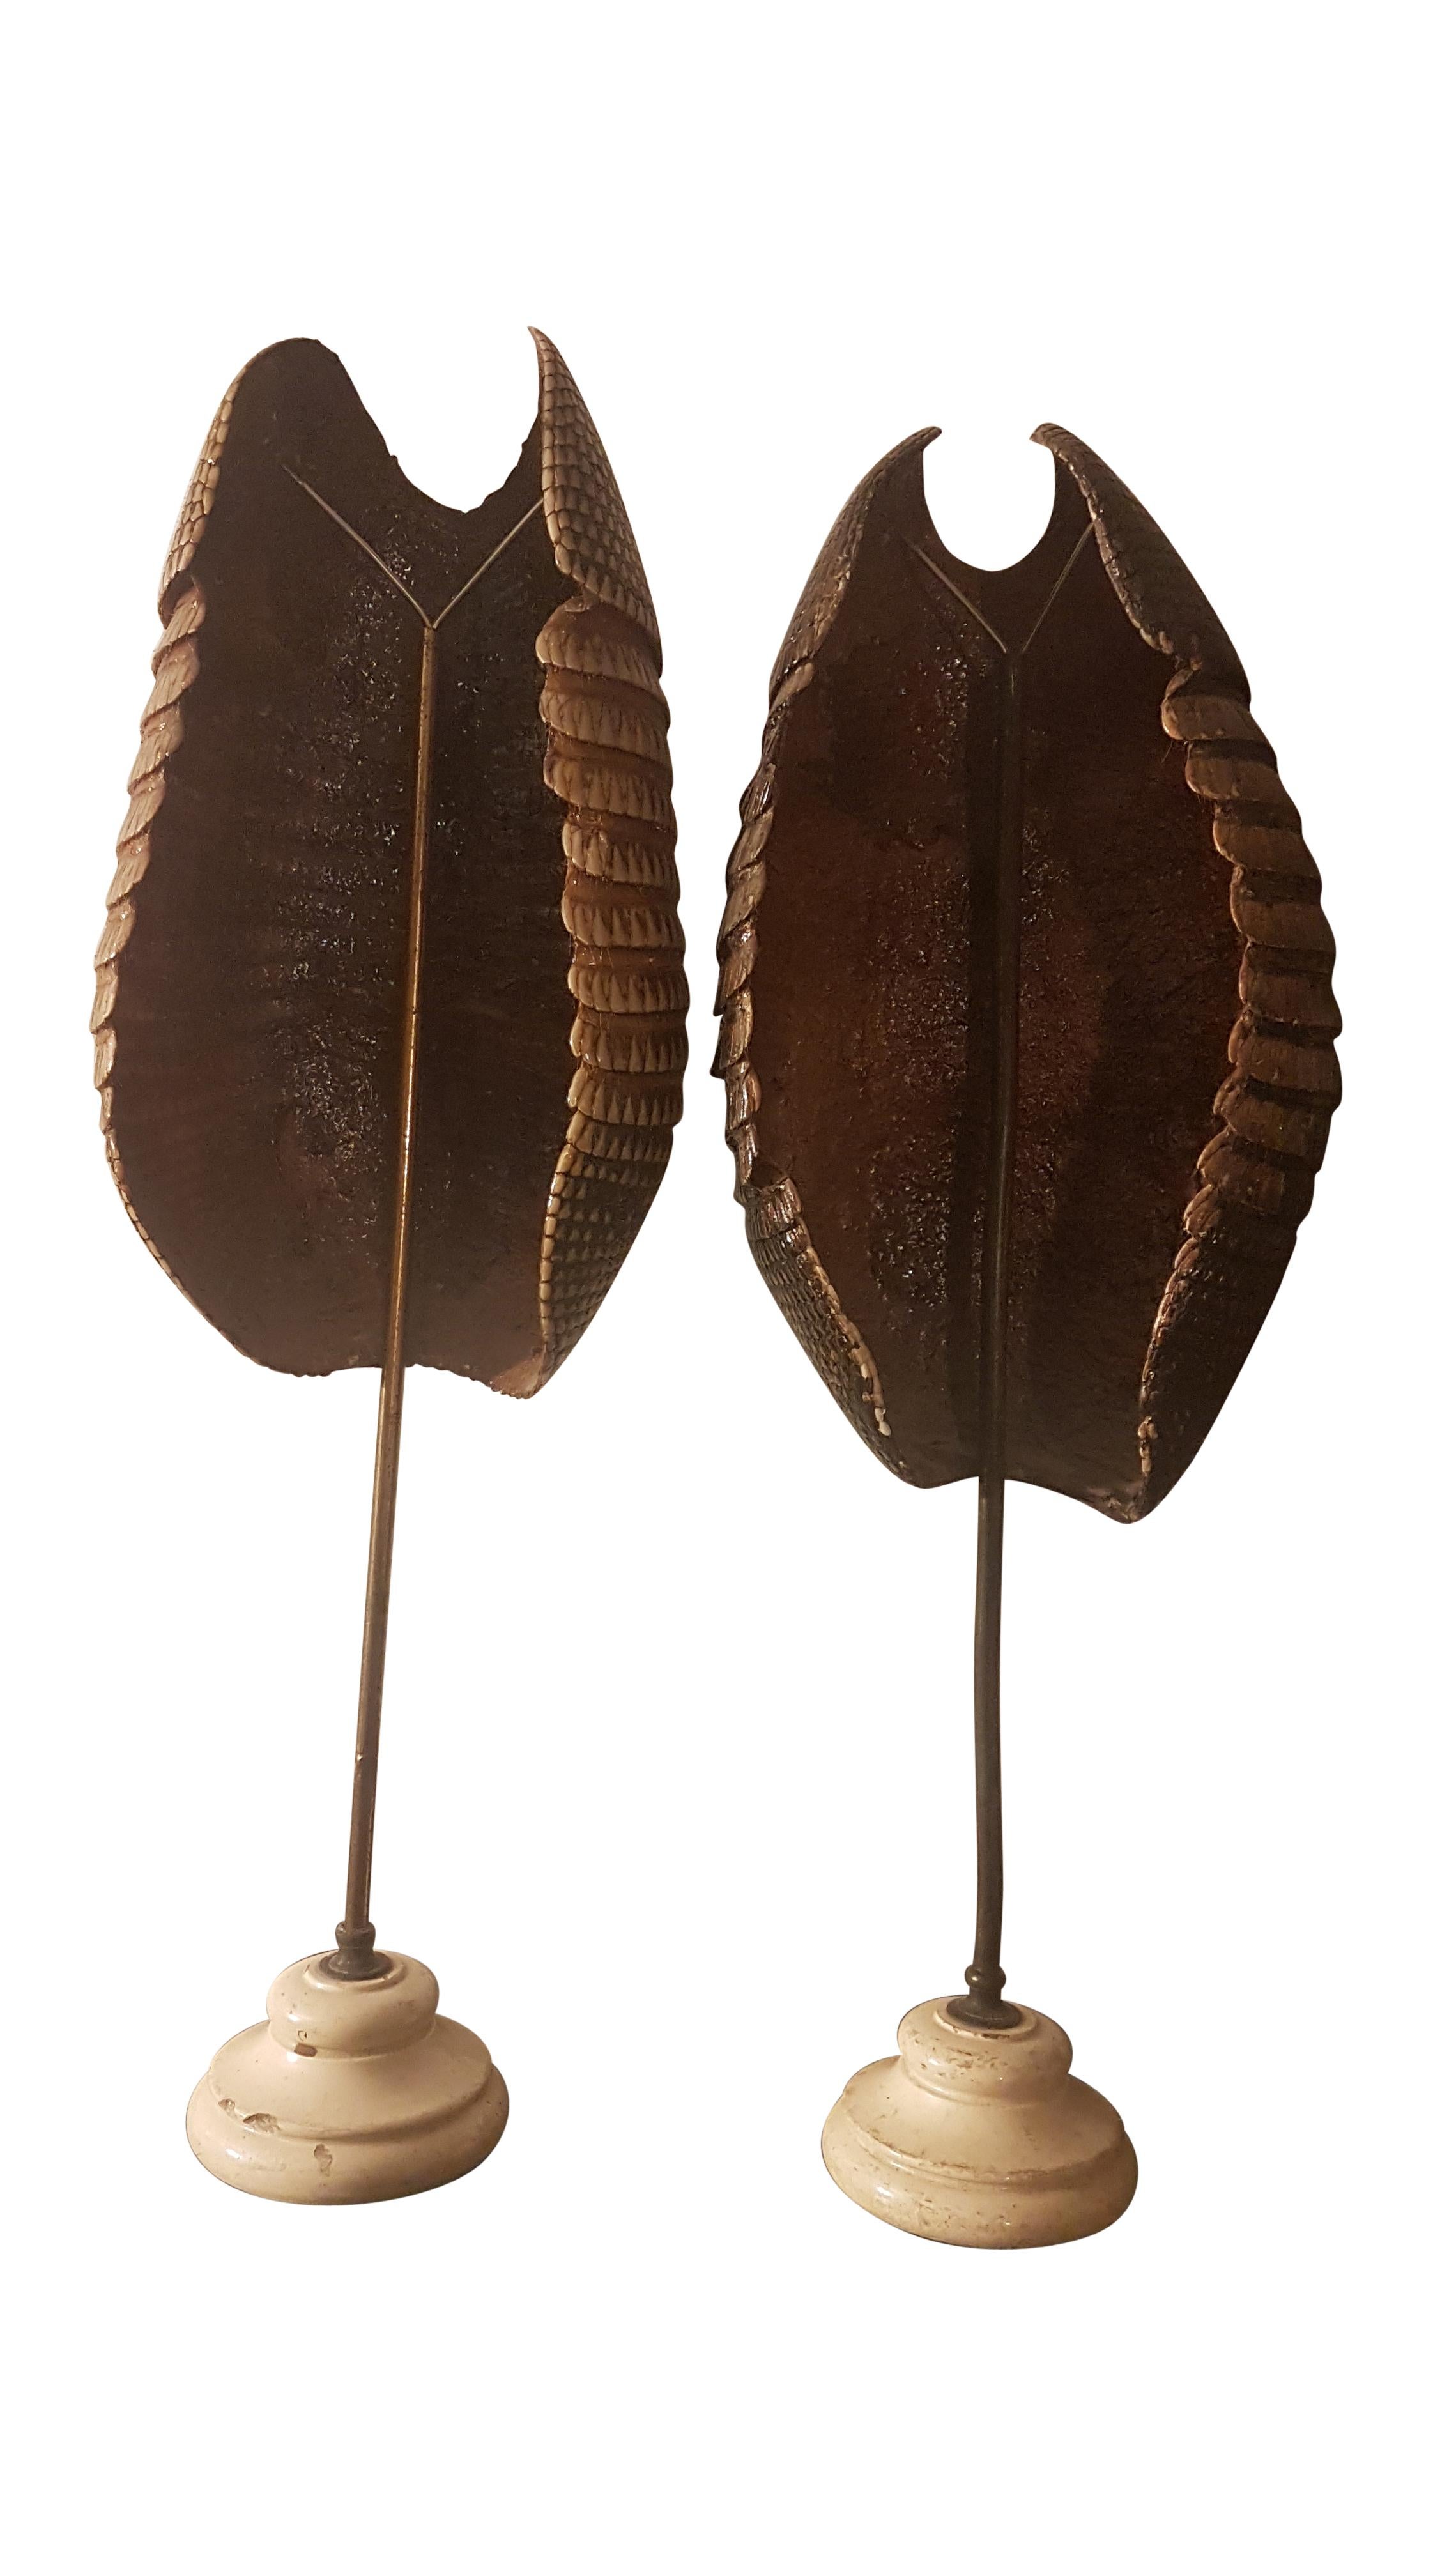 Pair of Late 19th Century Armadillo Shells on Stands In Distressed Condition In Bodicote, Oxfordshire